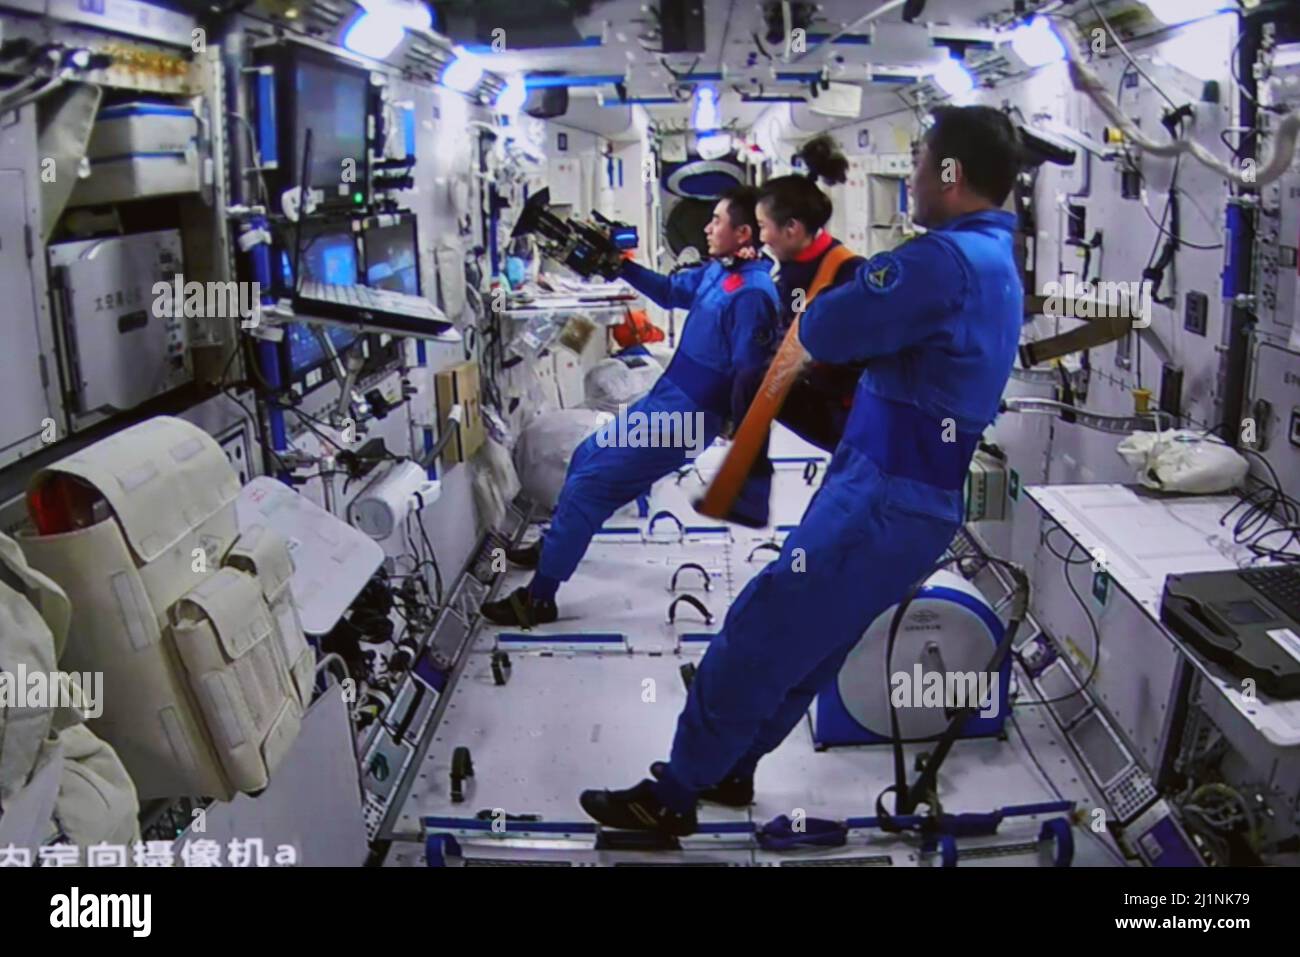 Beijing, China. 27th Mar, 2022. Screen image taken at Beijing Aerospace Control Center on March 27, 2022 shows the Shenzhou-13 astronauts watching the Tianzhou-2 cargo spacecraft leaving the core module of China's Tiangong space station. China's cargo spacecraft Tianzhou-2 separated from the core module of the country's space station Sunday afternoon, announced the China Manned Space Agency. At 3:59 p.m. Beijing Time, Tianzhou-2 left the core module of the Tiangong space station after completing all of its scheduled tasks, said the agency. Credit: Guo Zhongzheng/Xinhua/Alamy Live News Stock Photo